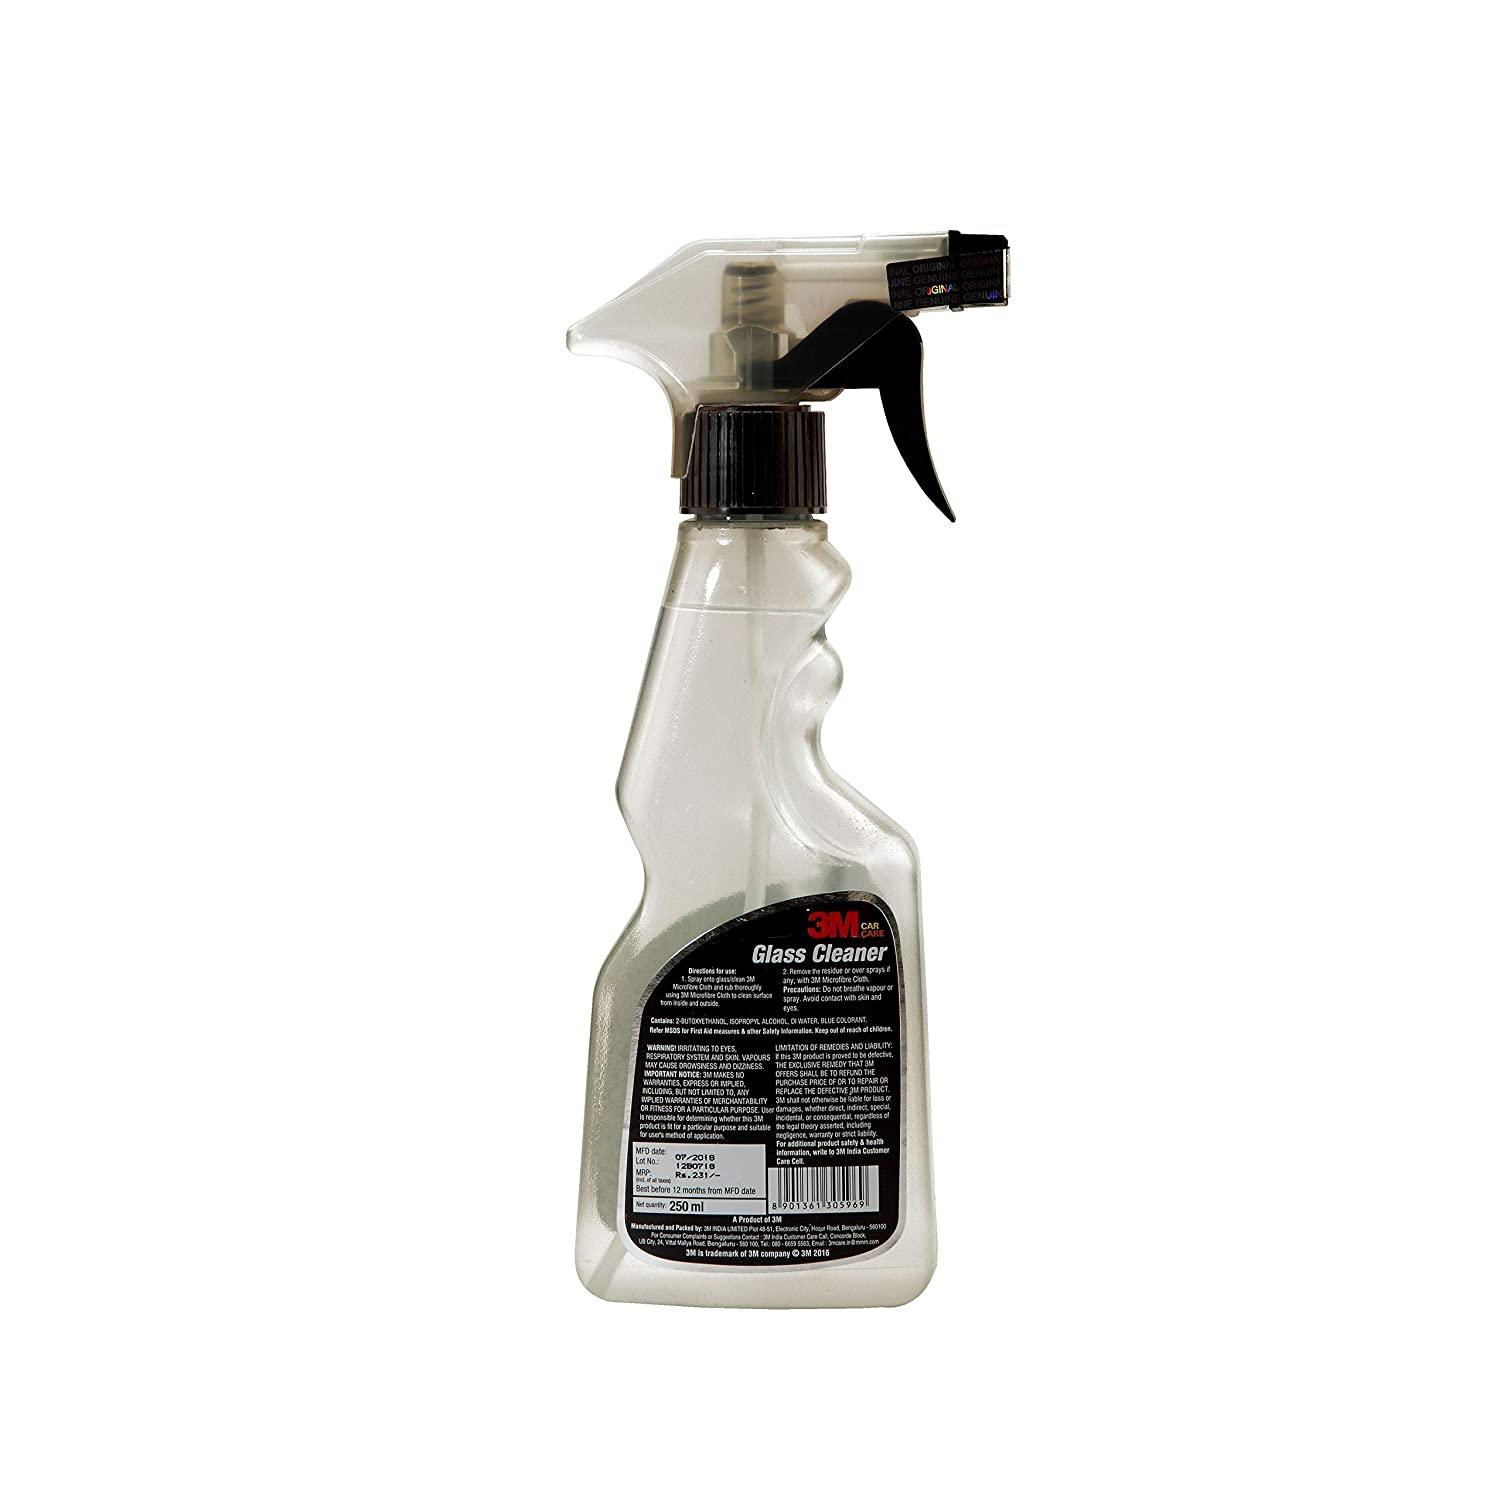 3M car glass cleaner